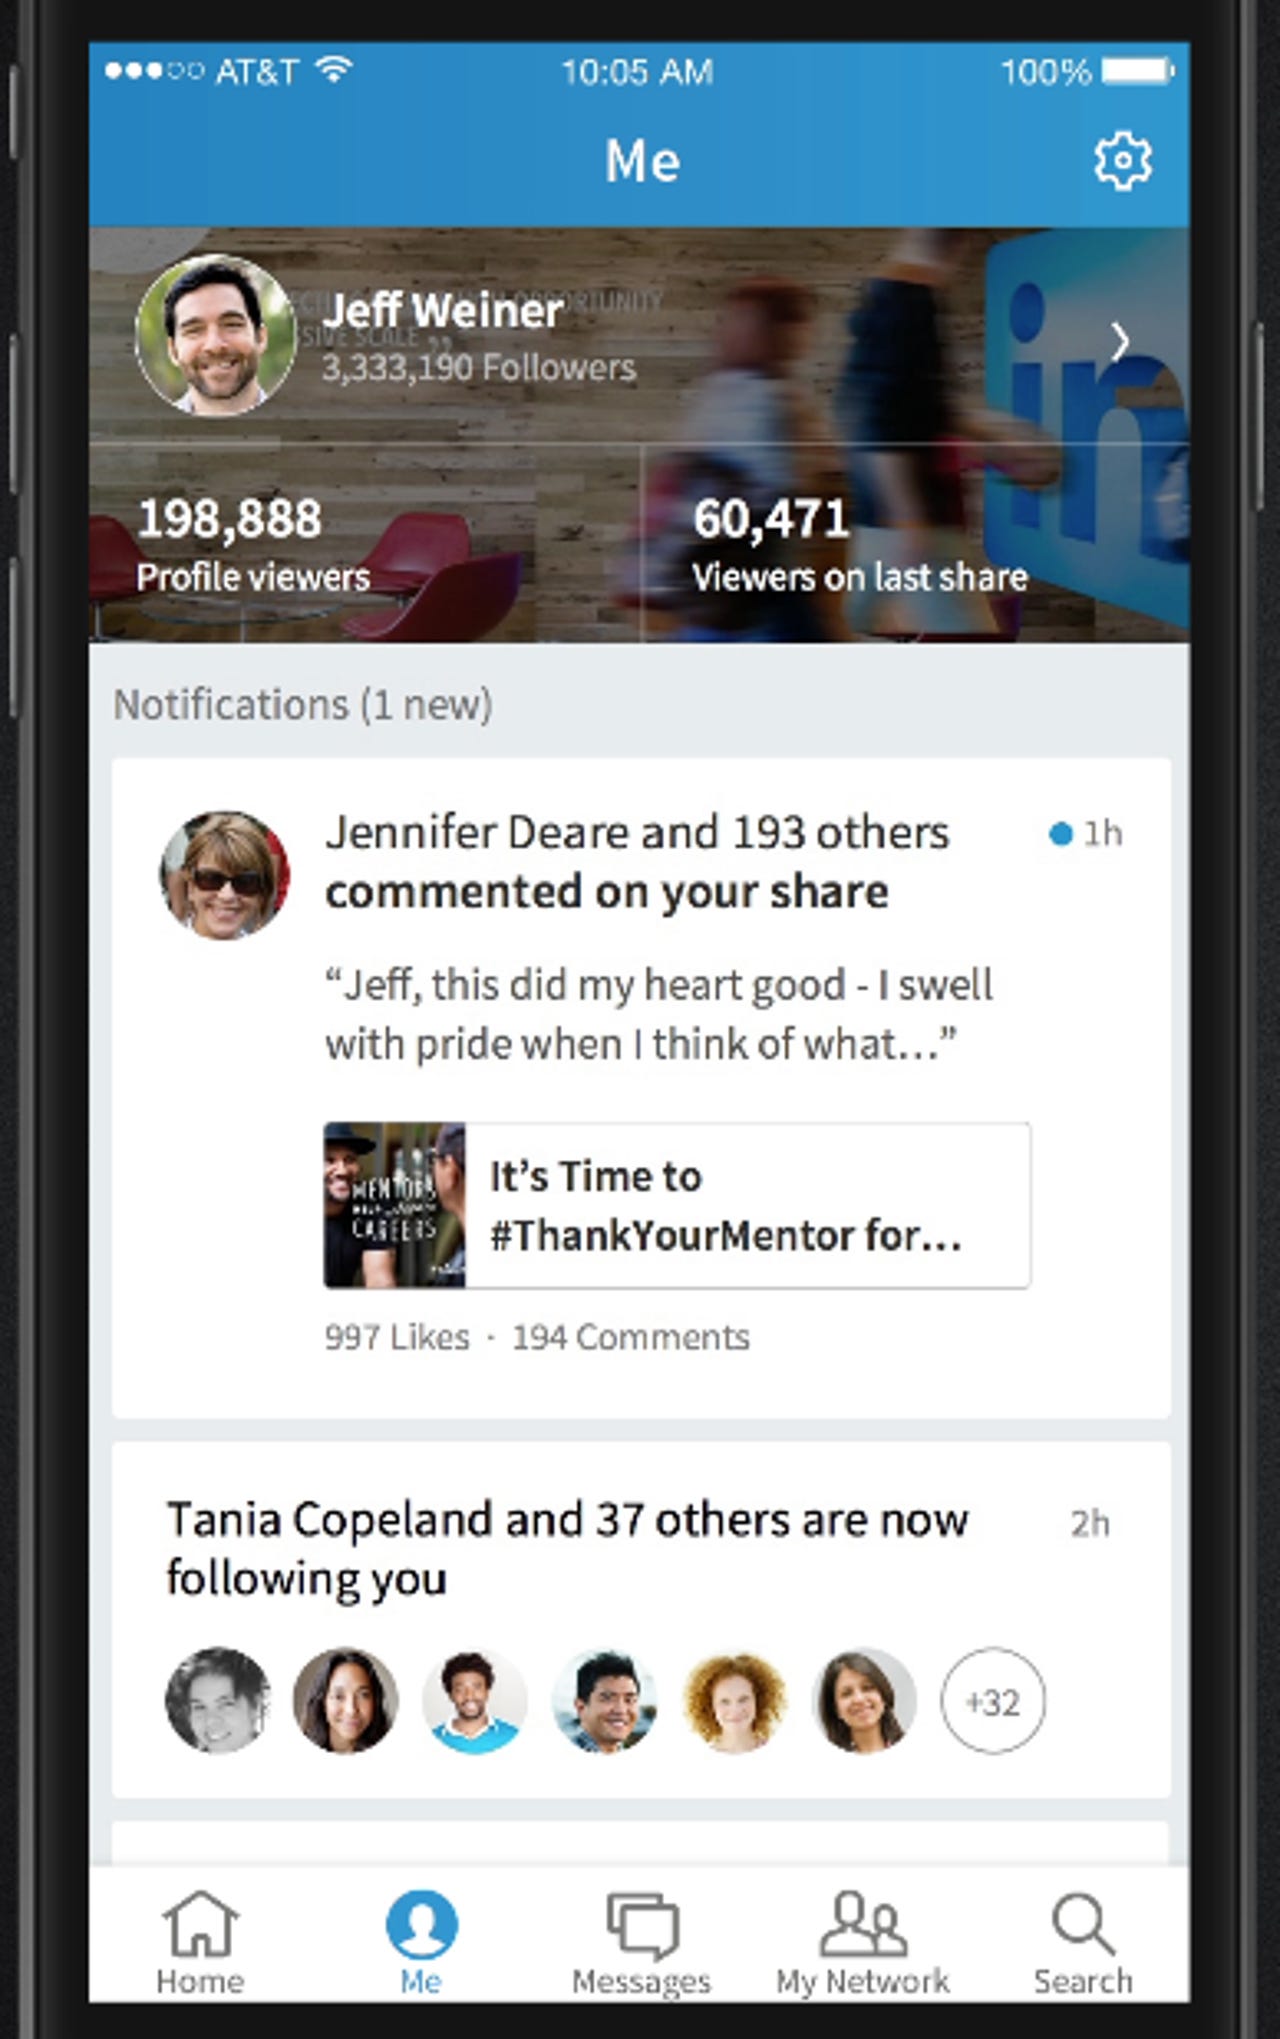 zdnet-linkedin-mobile-app-update-personal-brand-2.png